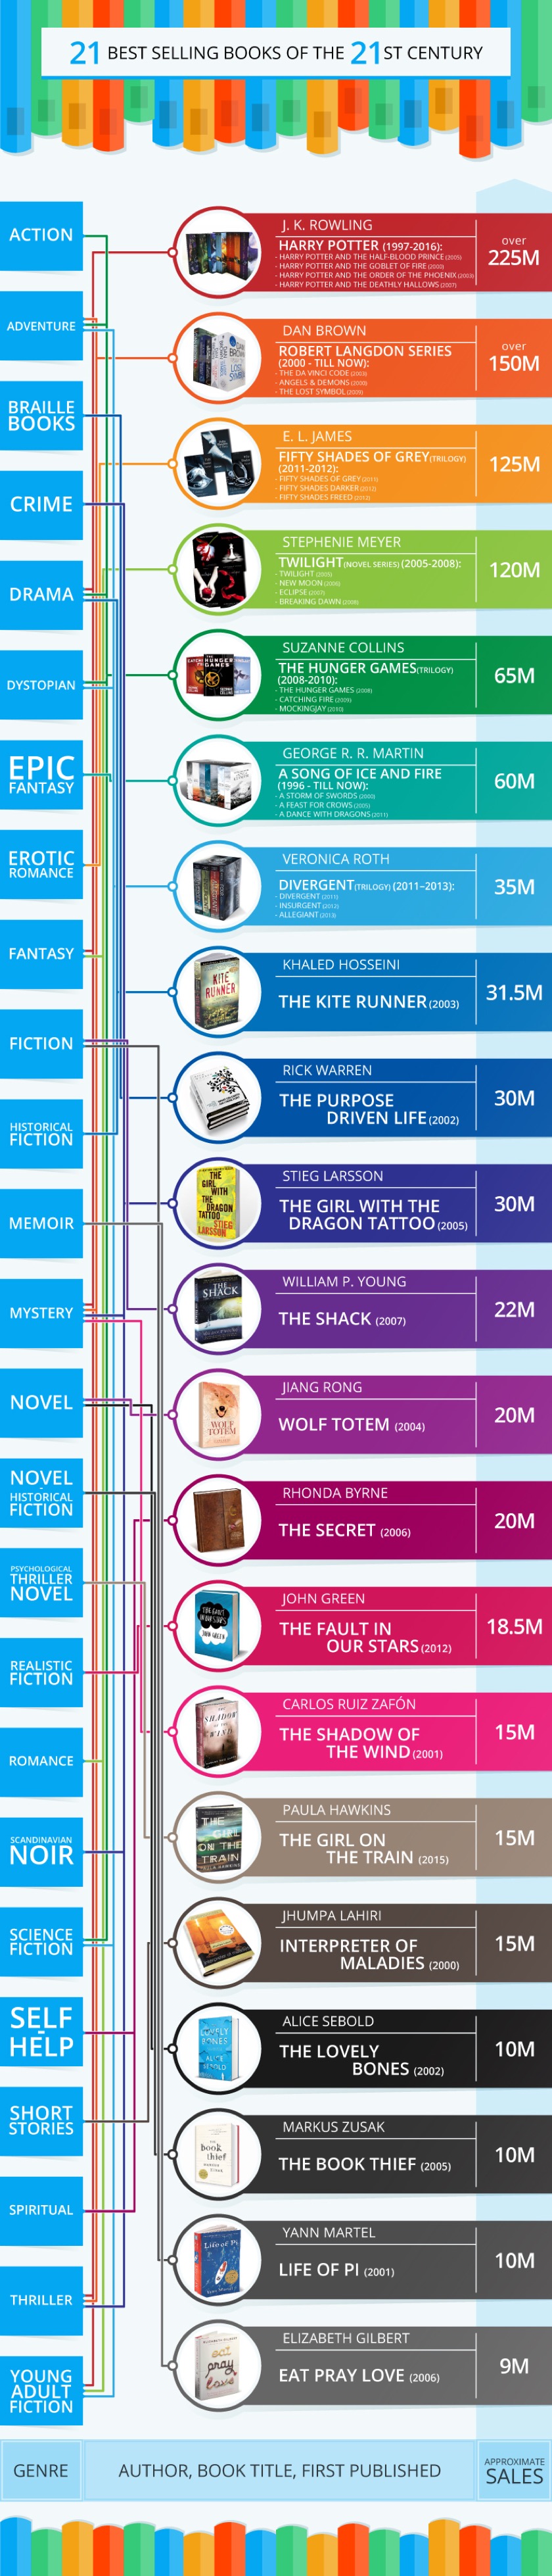 best selling novels of the 21st century [infographic]